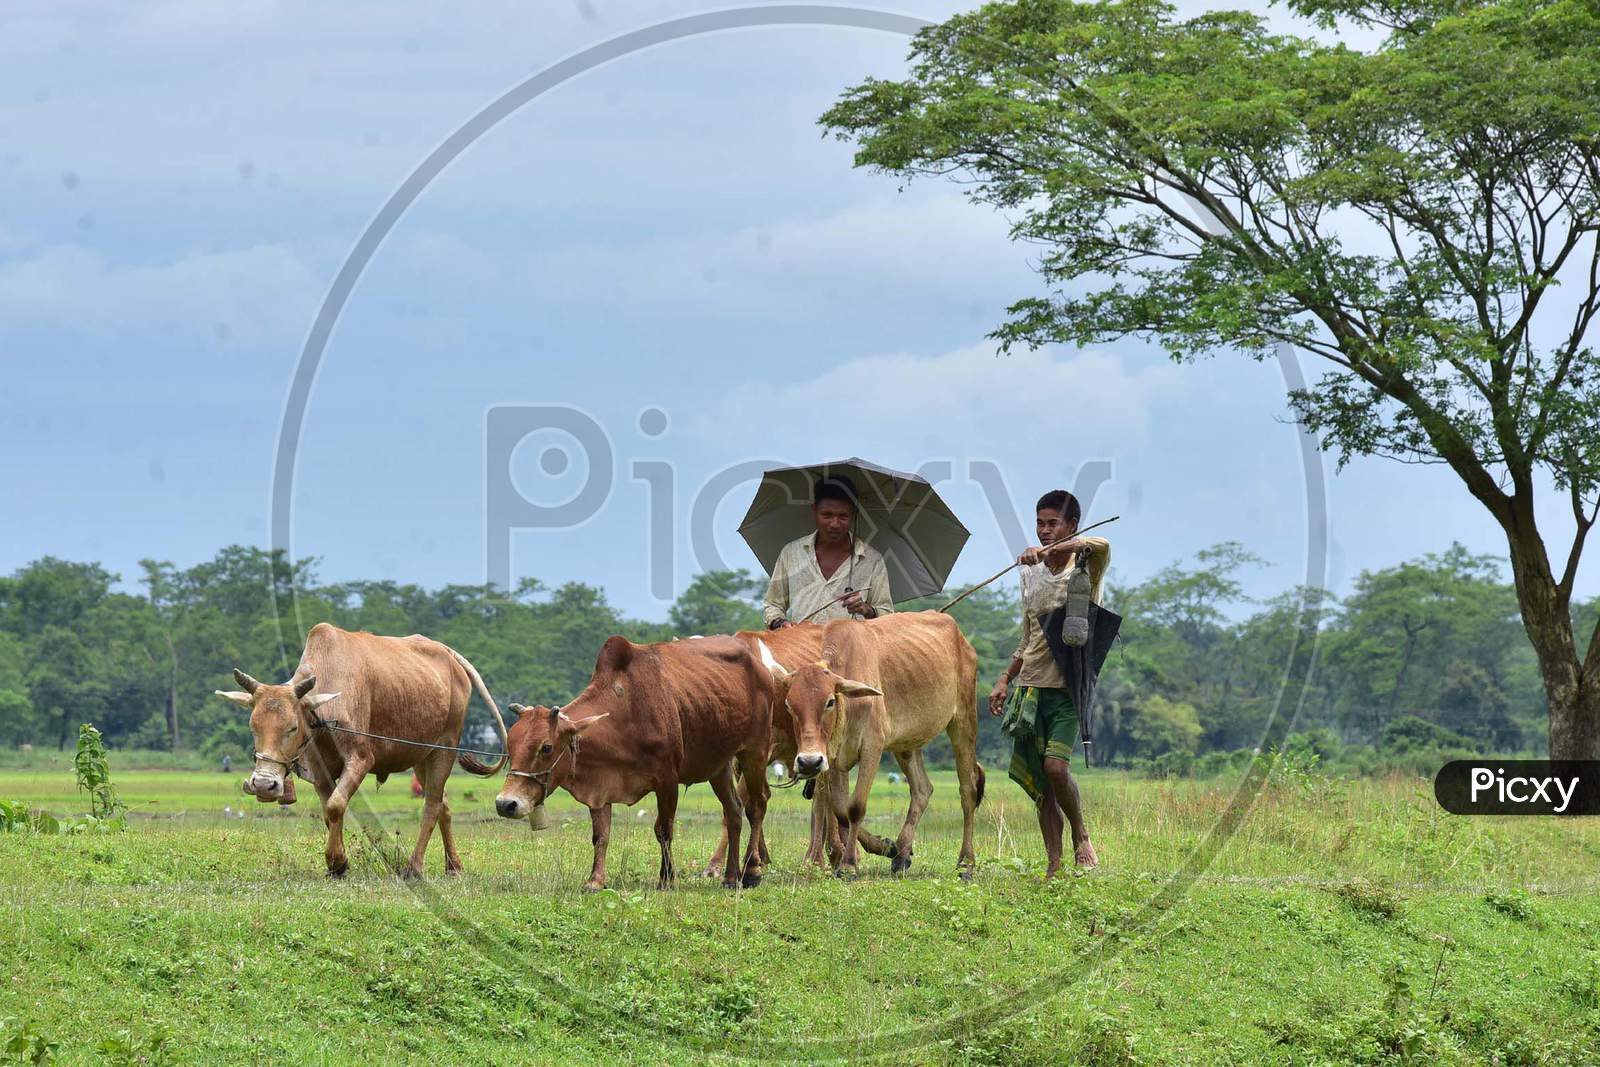 Farmers return home with their cattle after plowing the field for paddy plantation at a village in Nagaon, Assam on July 11, 2020